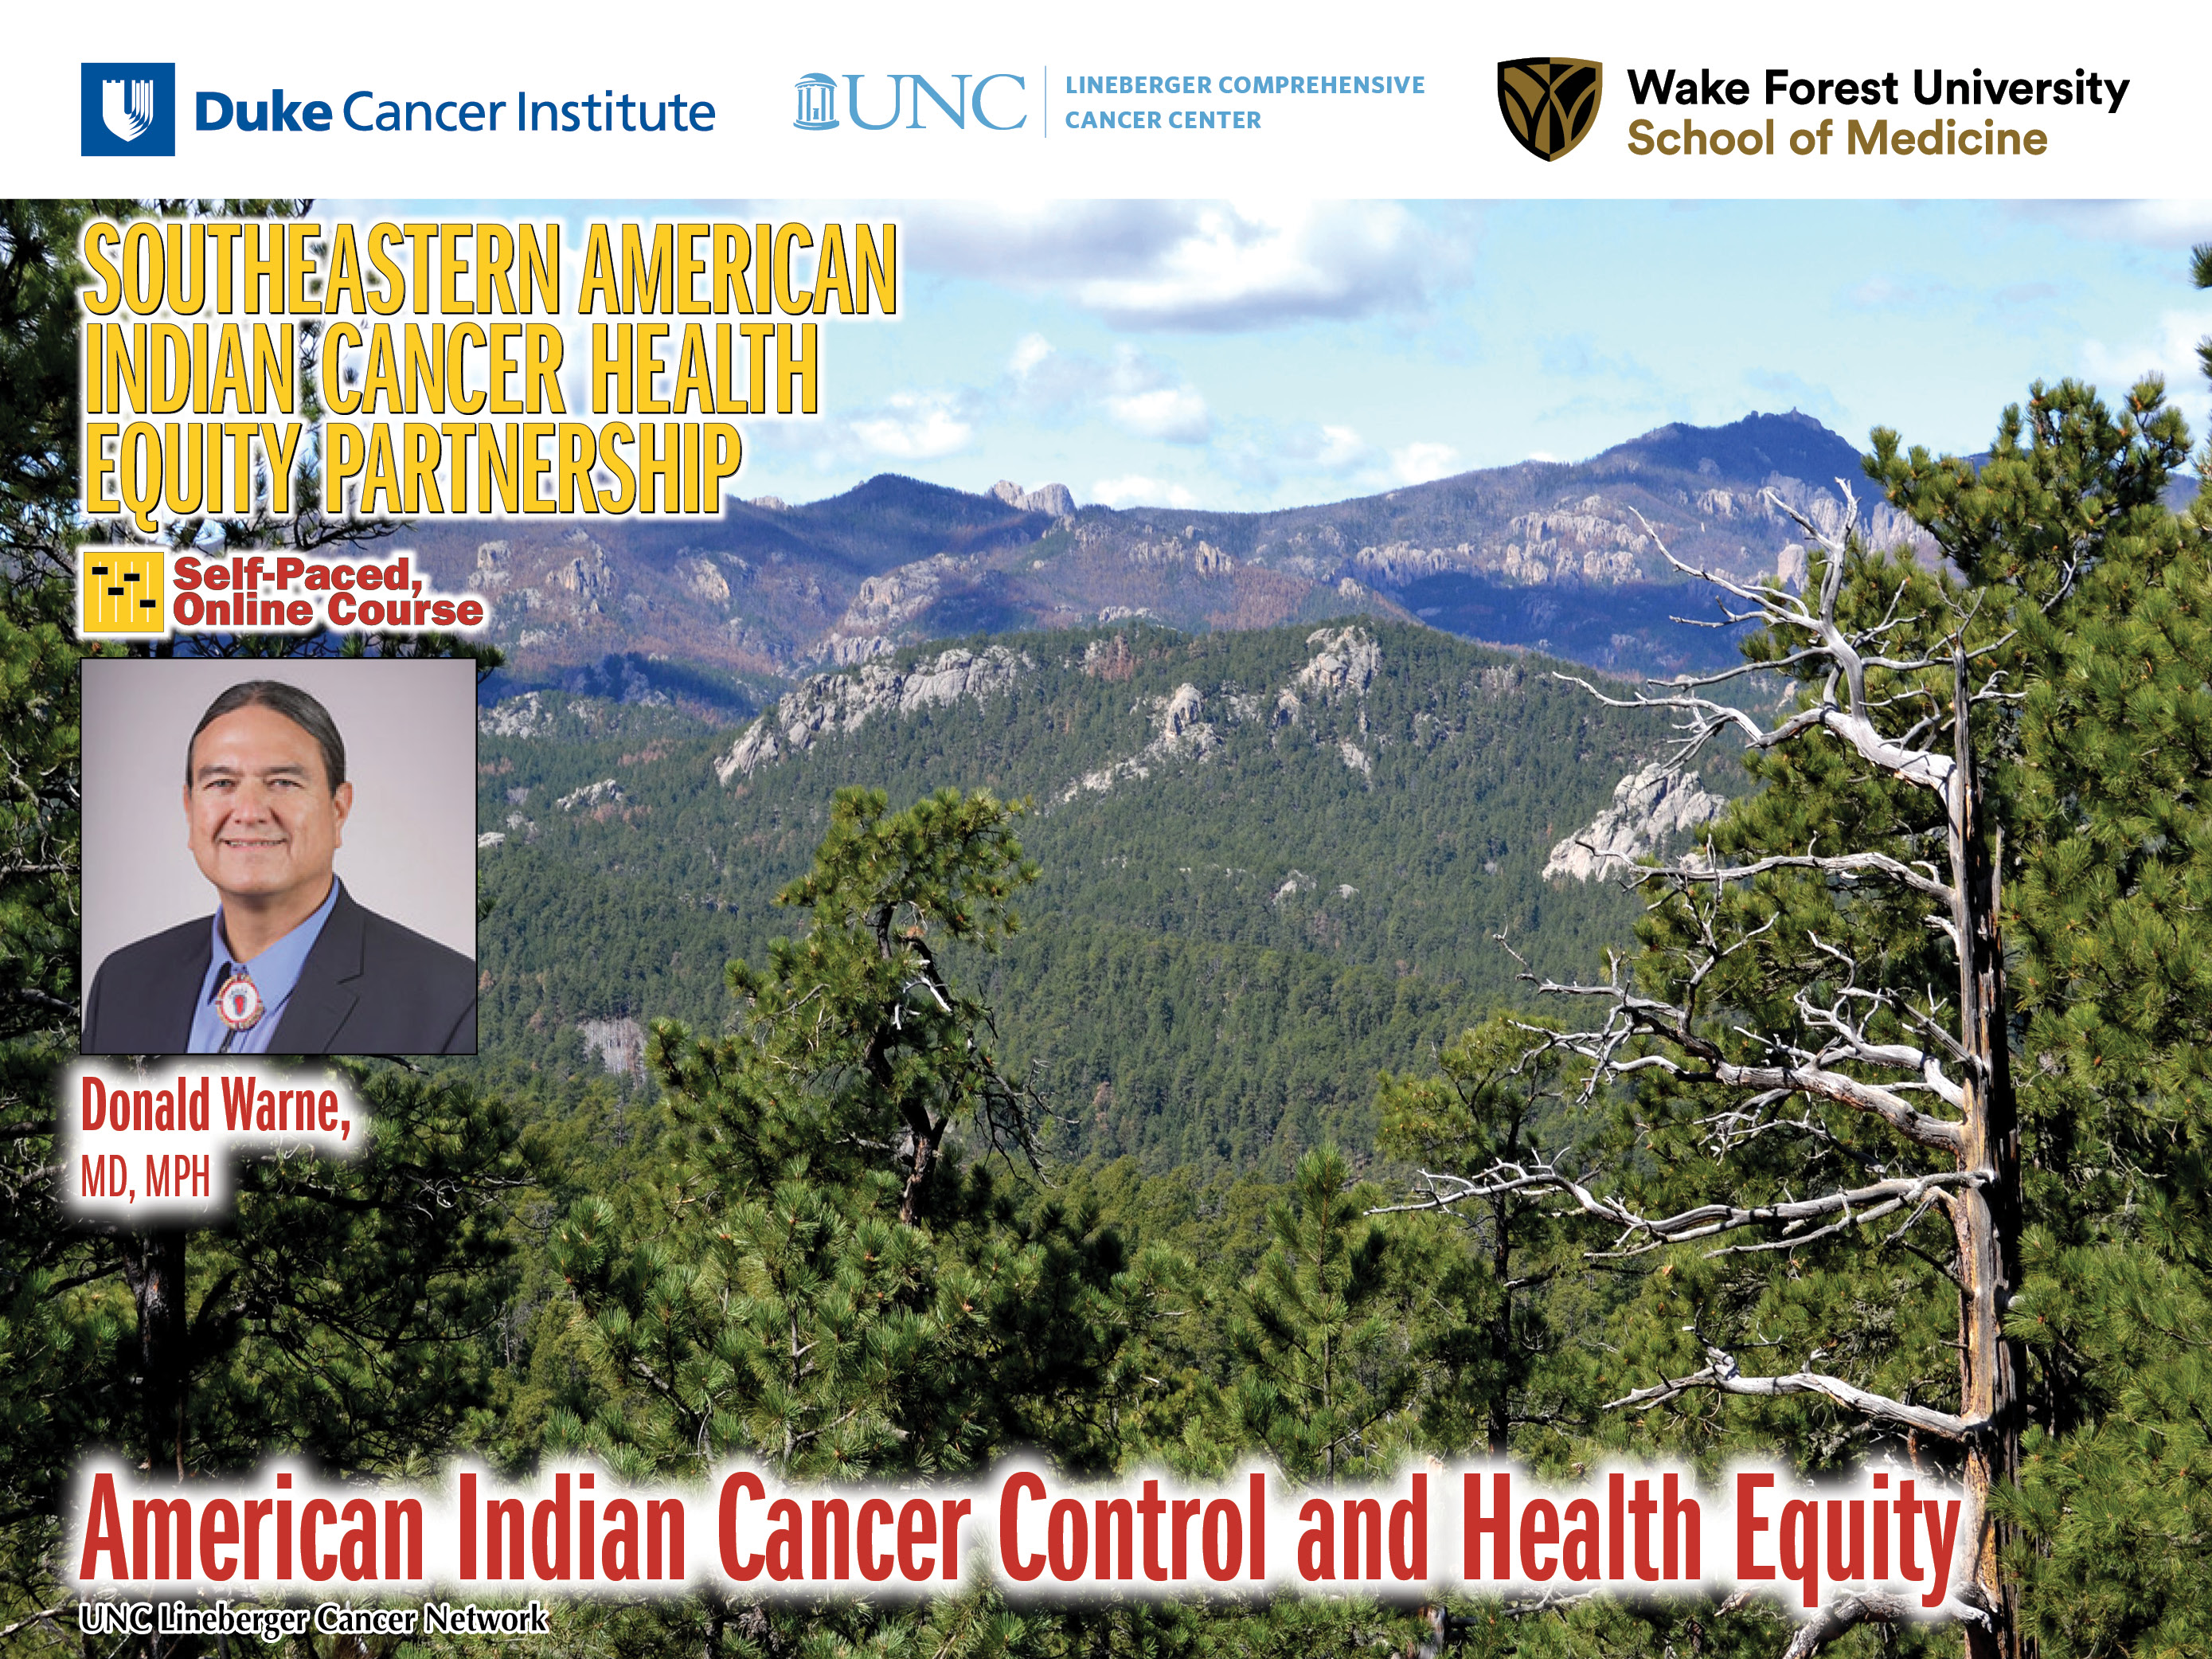 American Indian Cancer Control and Health Equity